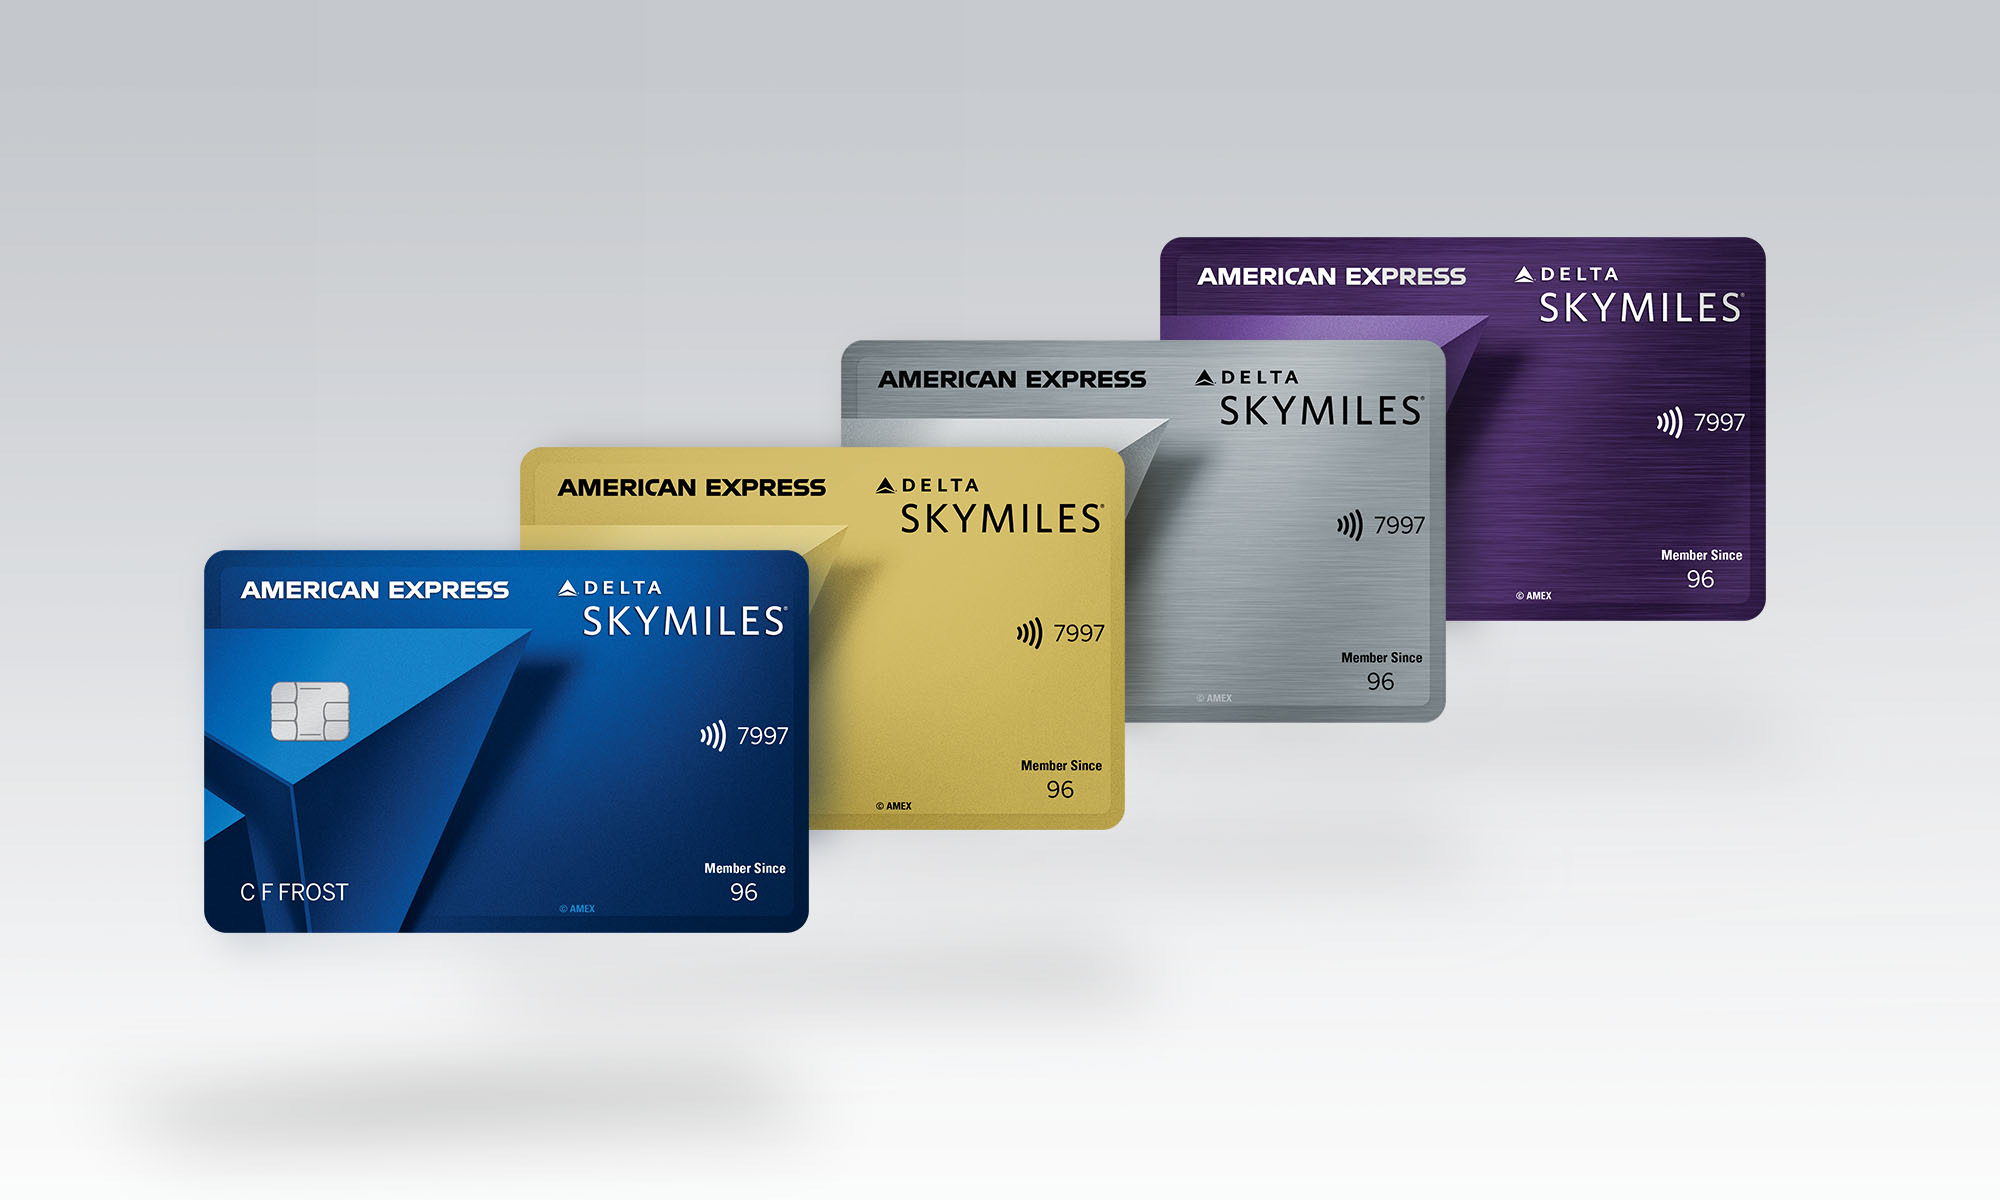 New Delta Credit Card Offers Up to 90,000 Miles and Statement Credit